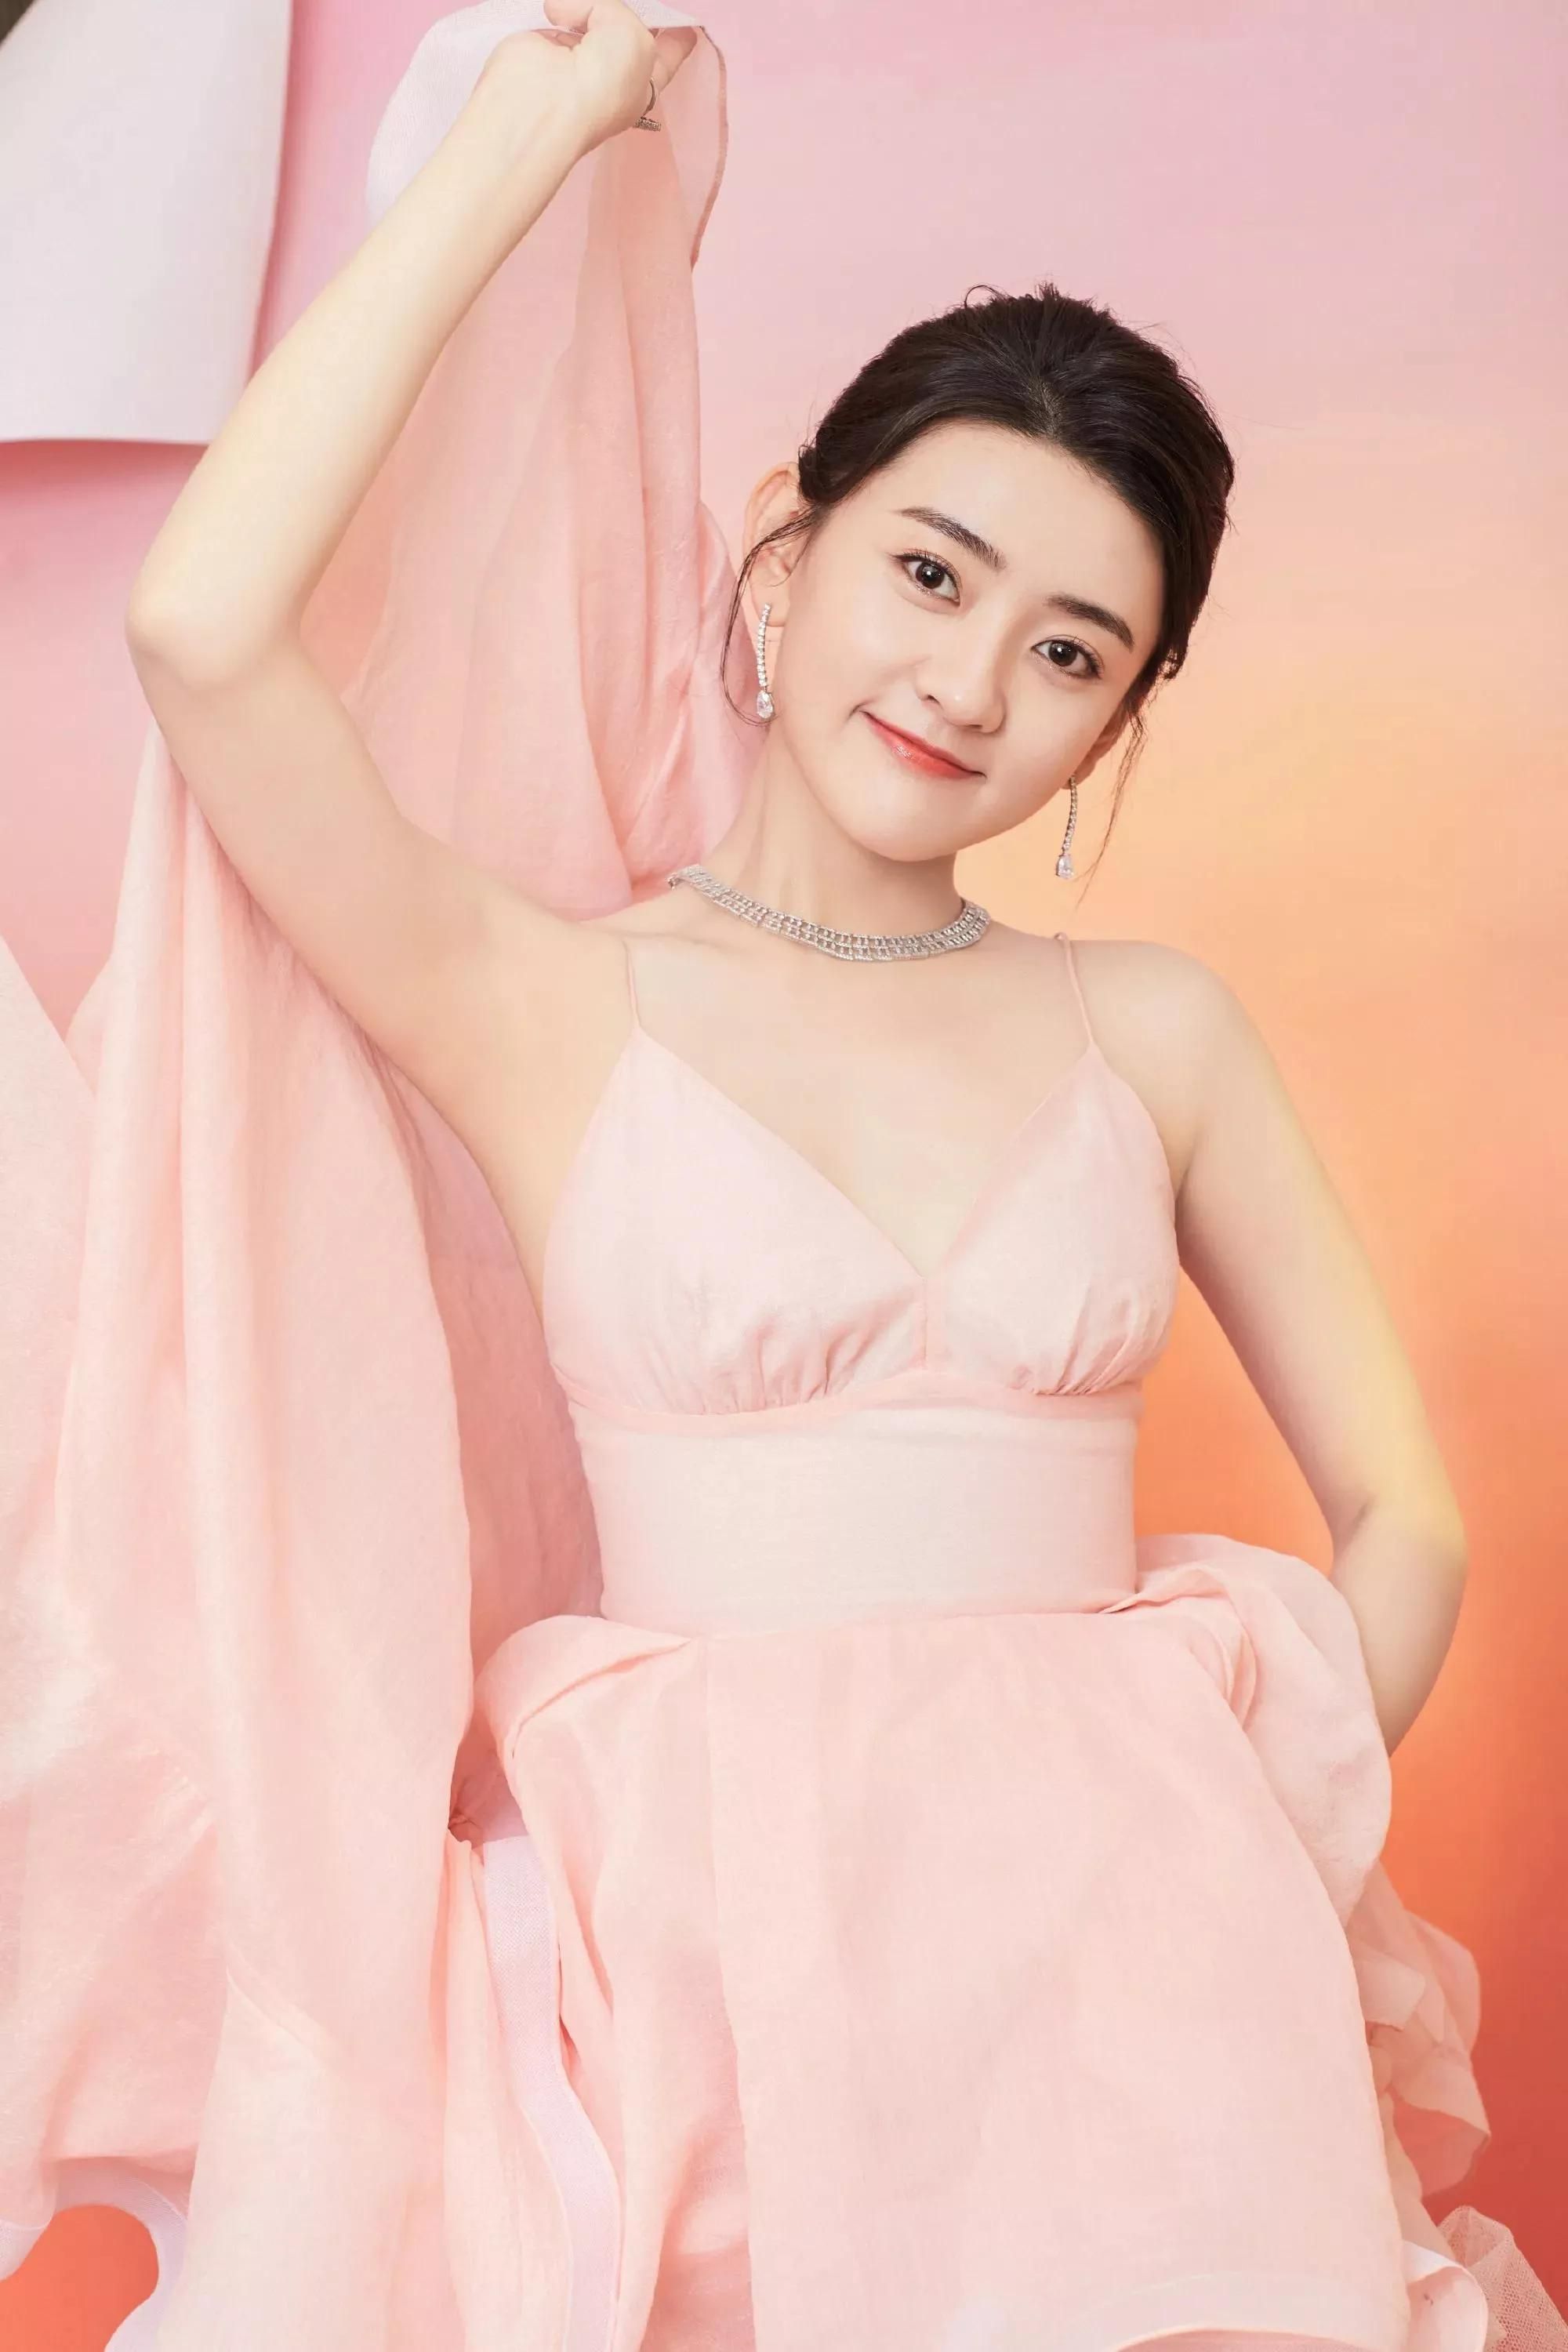 Liang Jie exquisite wallpaper: looks very sweet, unknowingly people like her